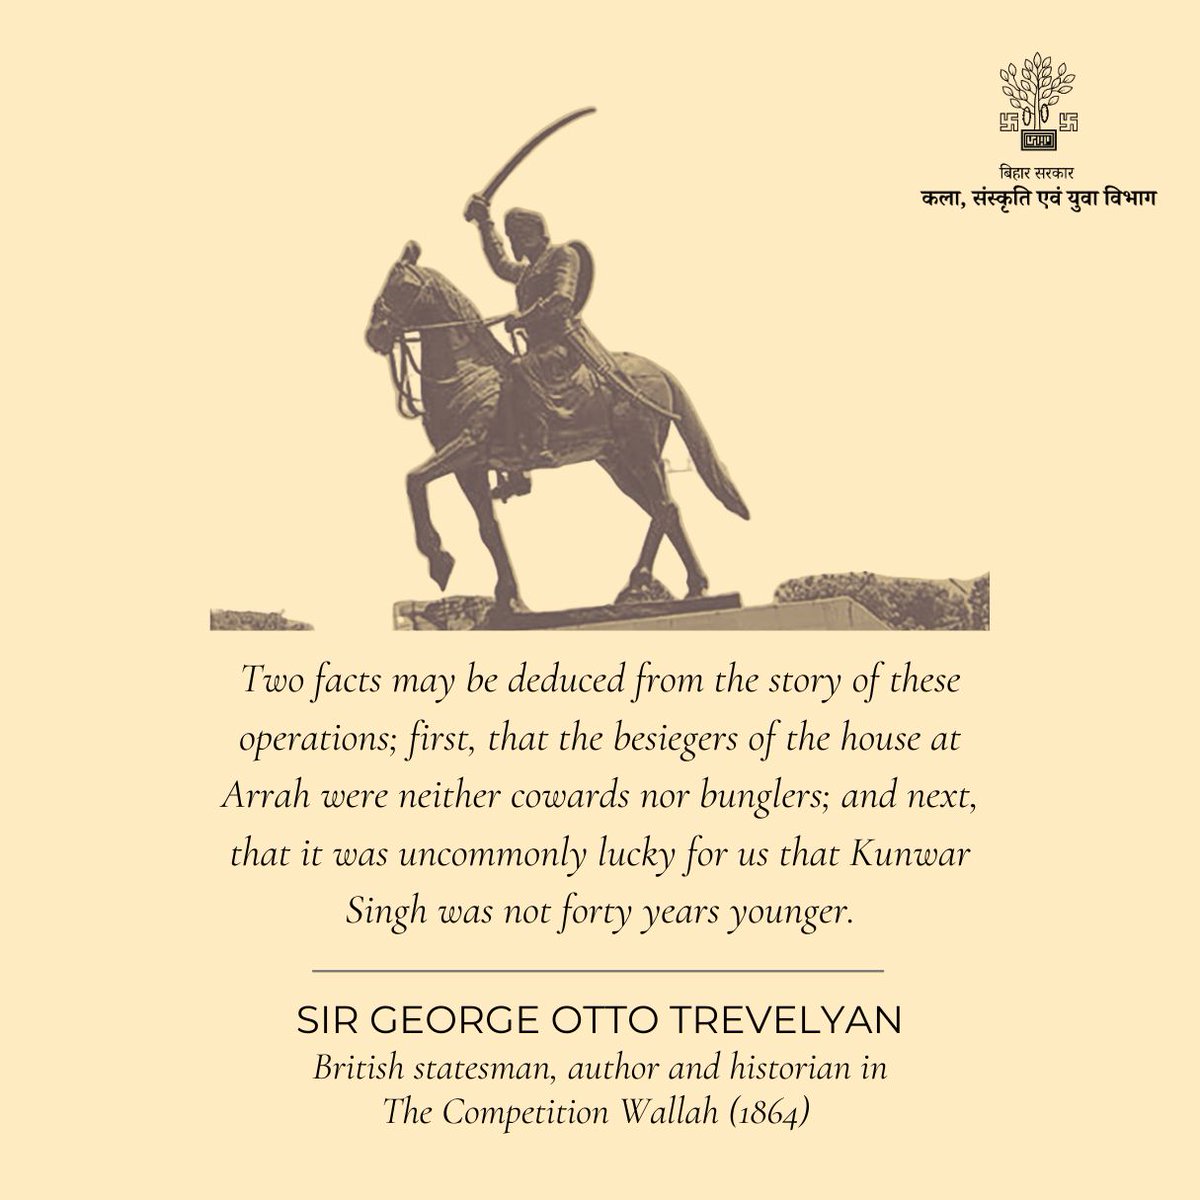 On the occasion of #Vijyotsava, we pay humble tribute to the 'Lion of Bihar,' #BabuVeerKunwarSingh, a brave warrior who fought the British relentlessly until his last breath. His sacrifice and courage forever inspire us to stand up for what's right, no matter the cost.